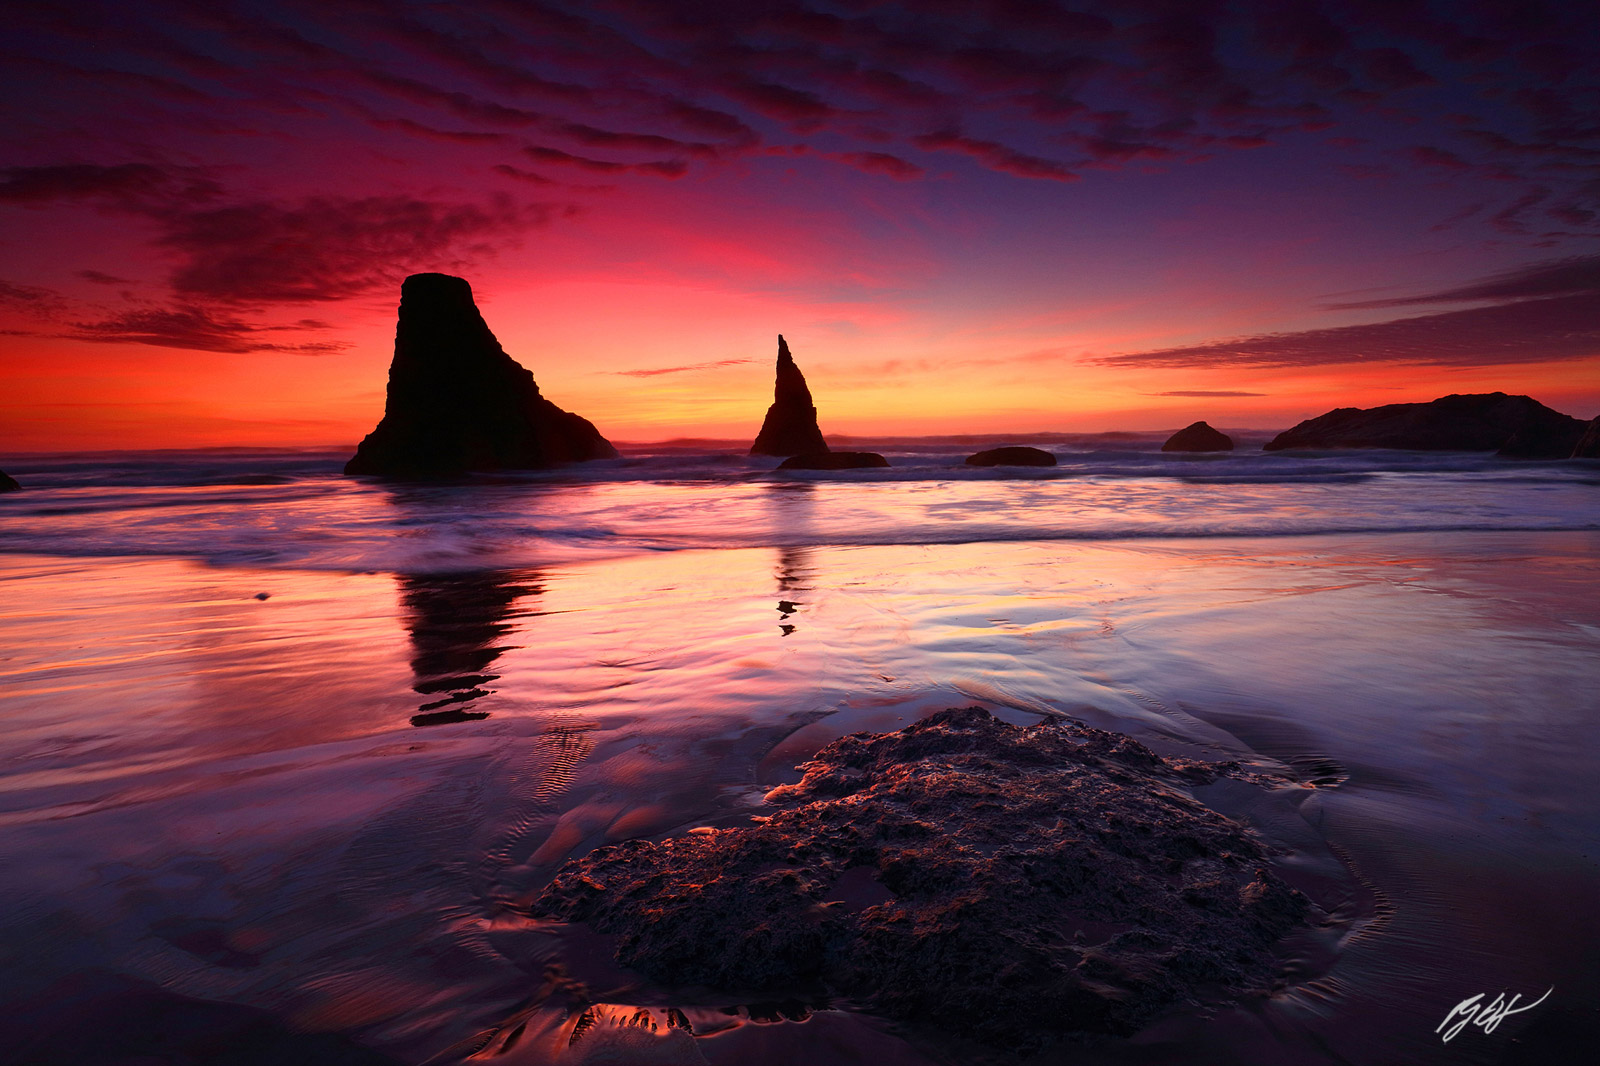 Sunset and the Wizards Hat from Face Rock Beach in Bandon Oregon